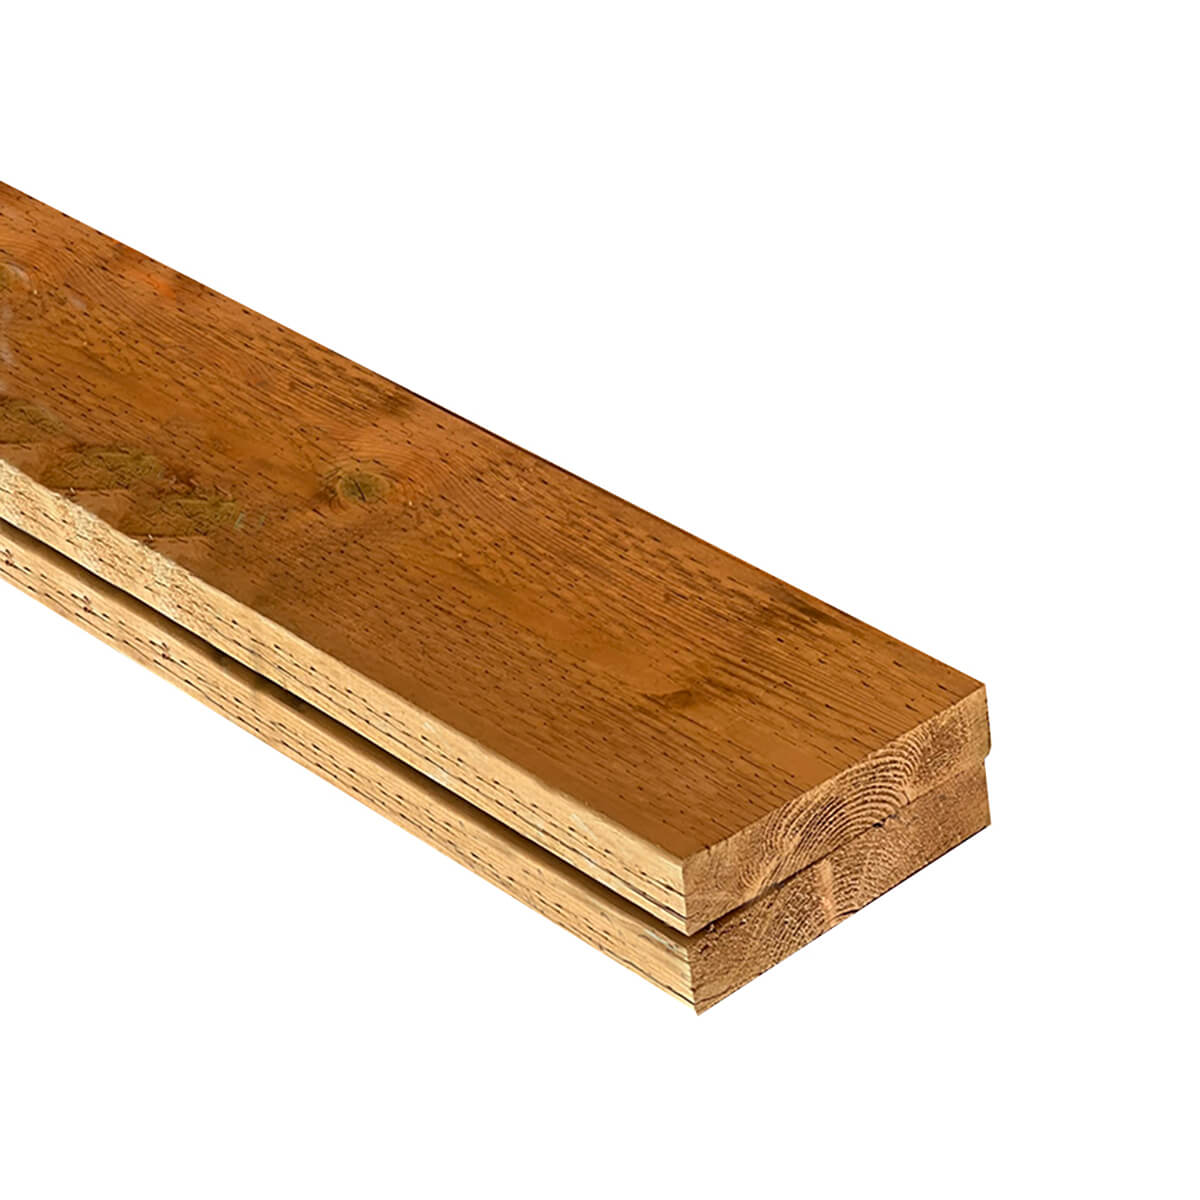 2X8X8-ft - .40 - Pressure Treated Lumber - Ground Contact